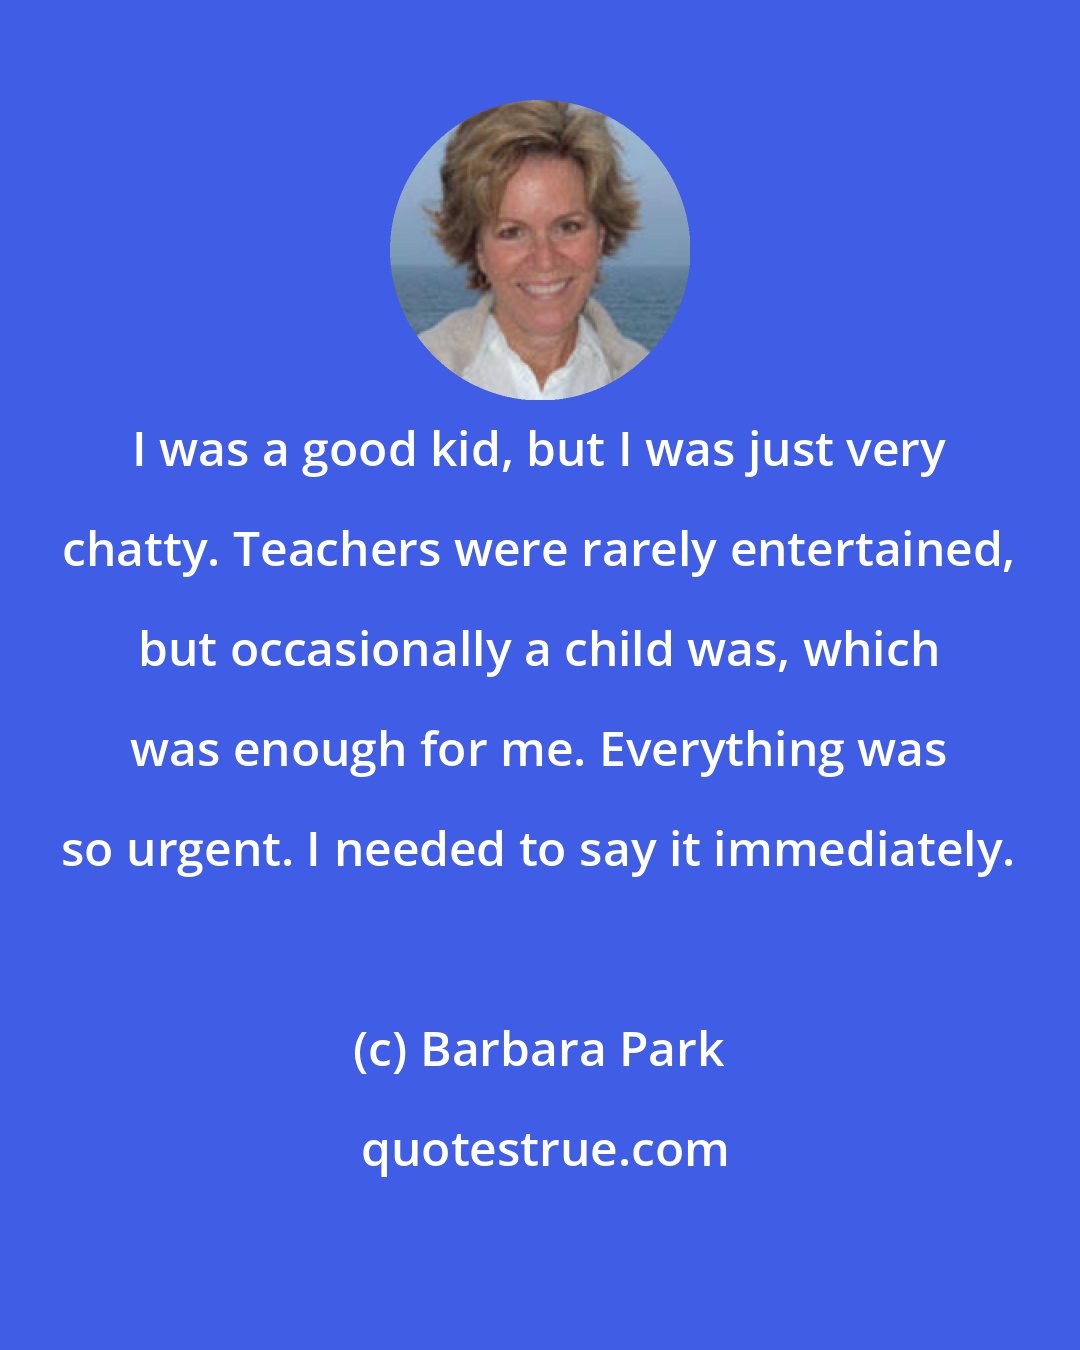 Barbara Park: I was a good kid, but I was just very chatty. Teachers were rarely entertained, but occasionally a child was, which was enough for me. Everything was so urgent. I needed to say it immediately.